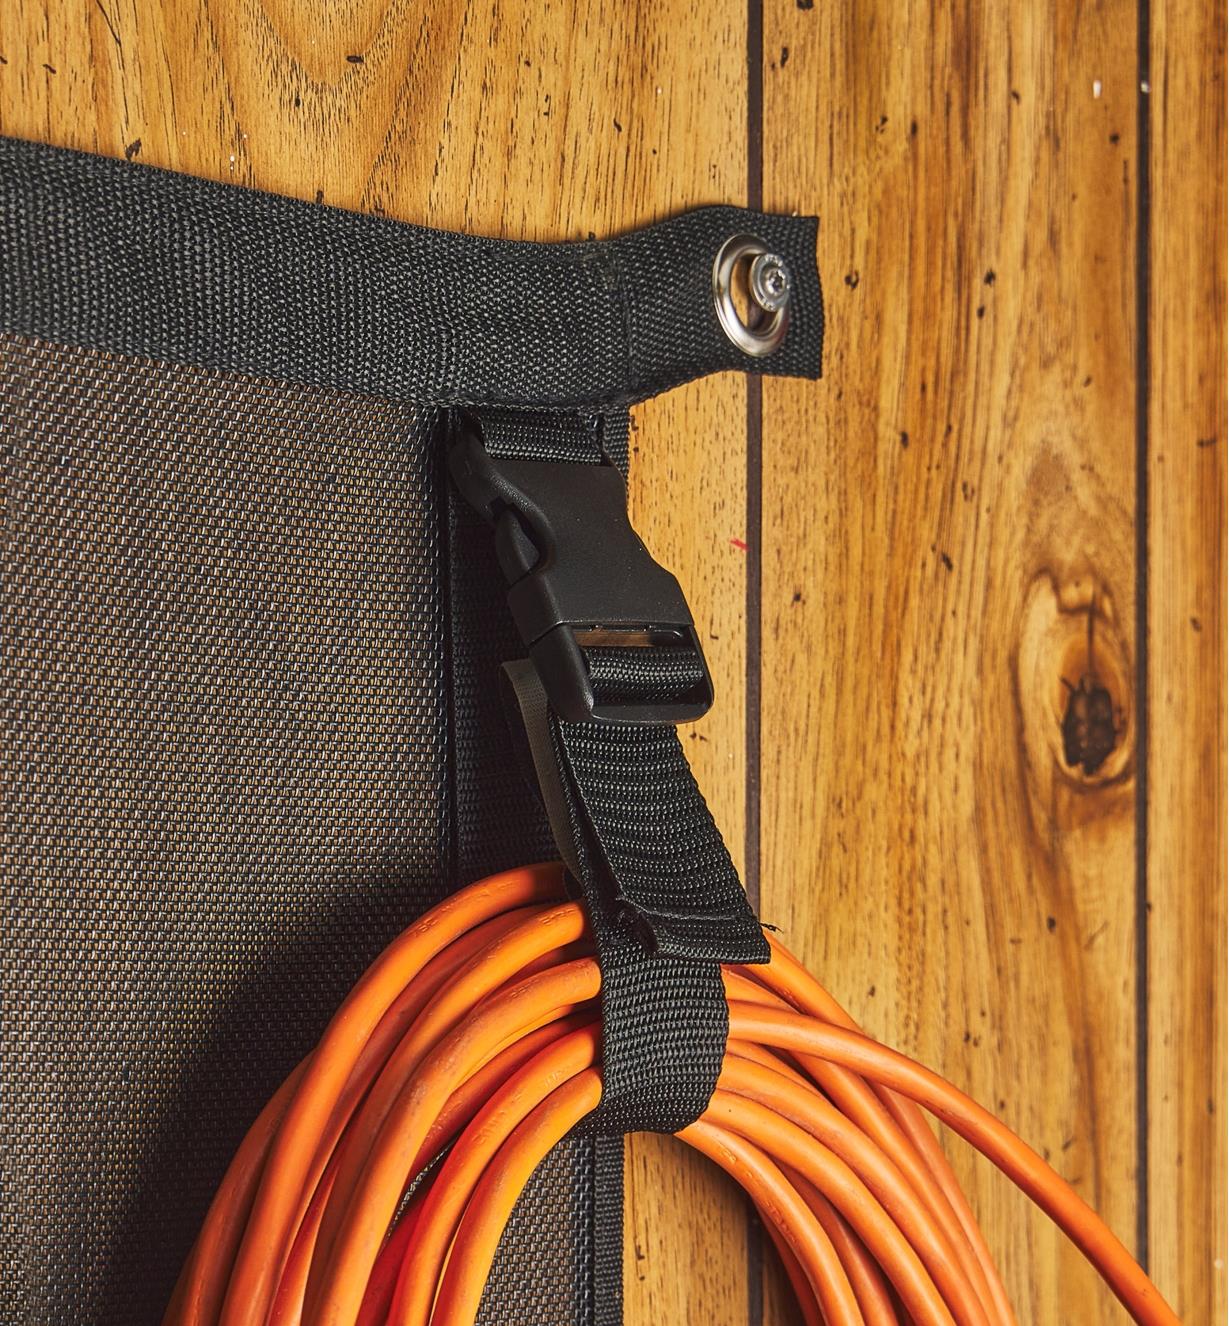 A strap on a hanging organizer is holding a coiled, orange extension cord.